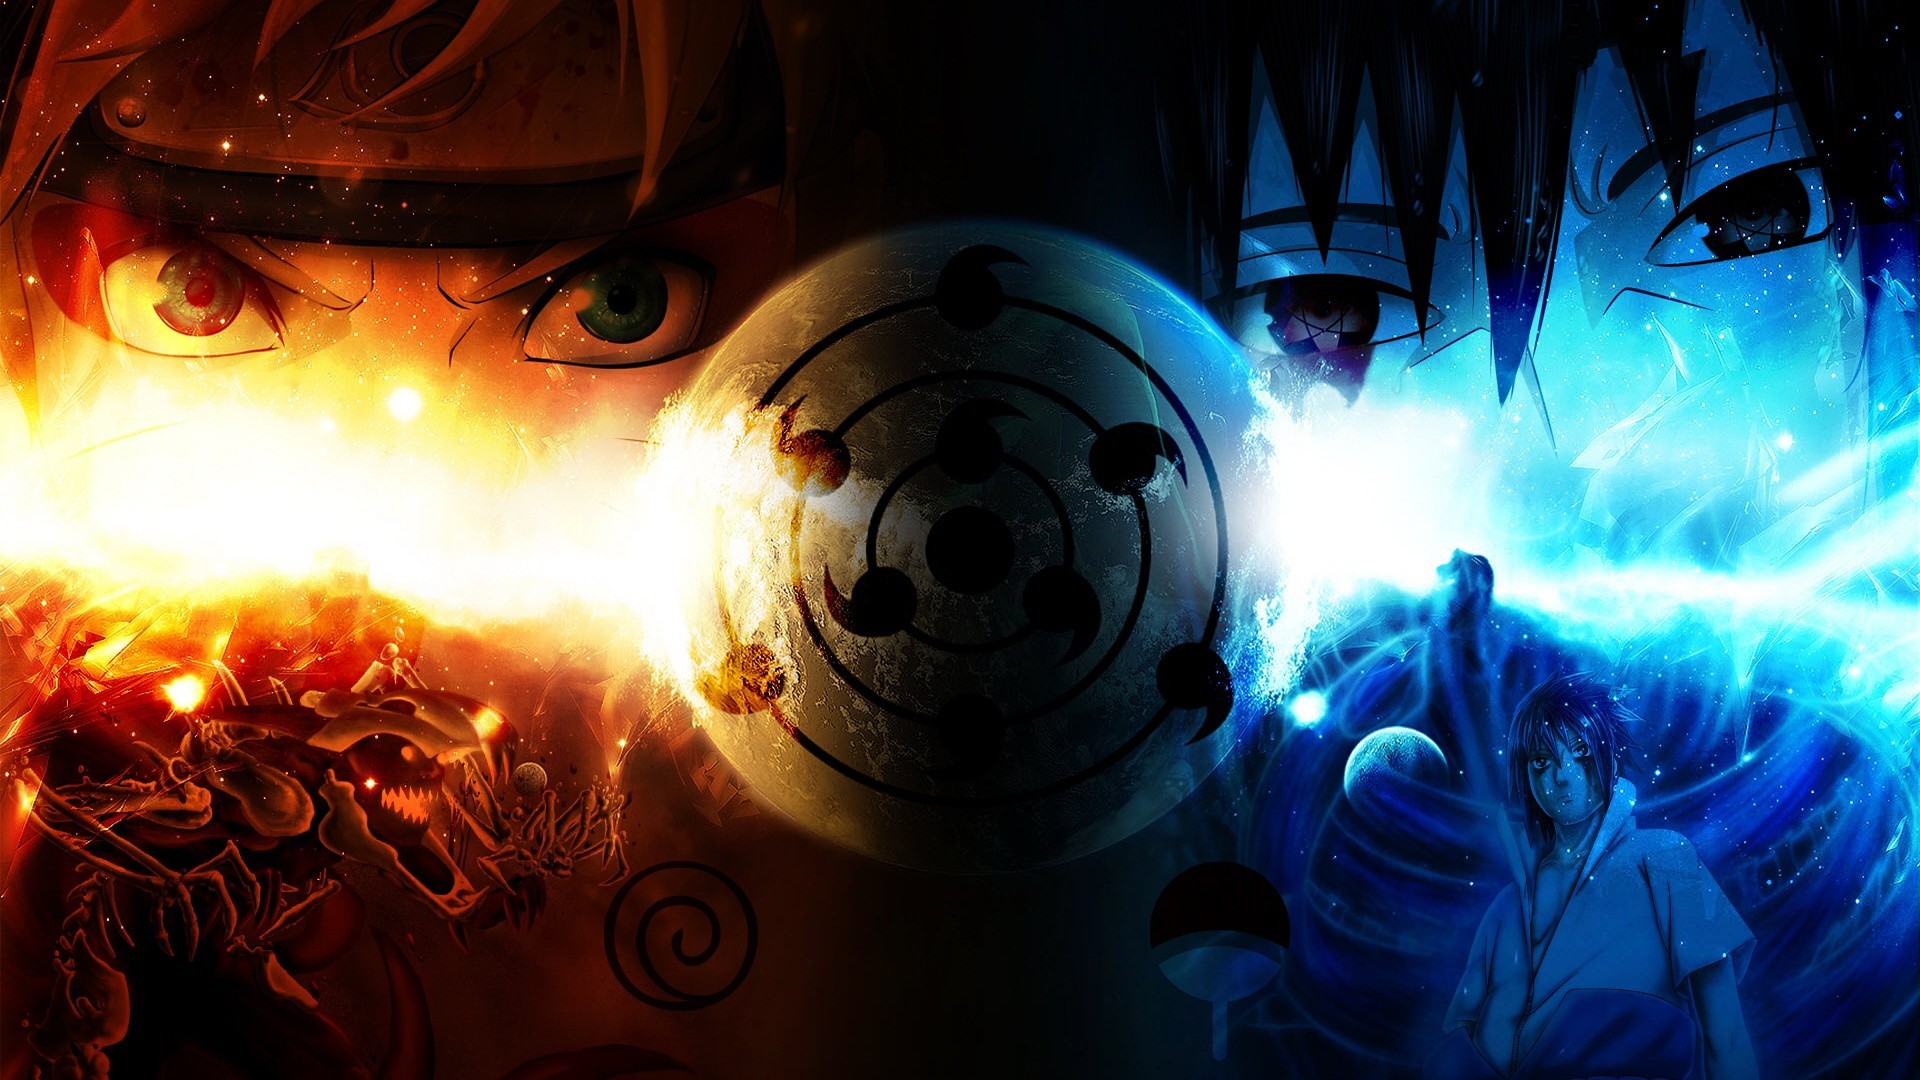 Naruto Wallpapers Best Wallpapers